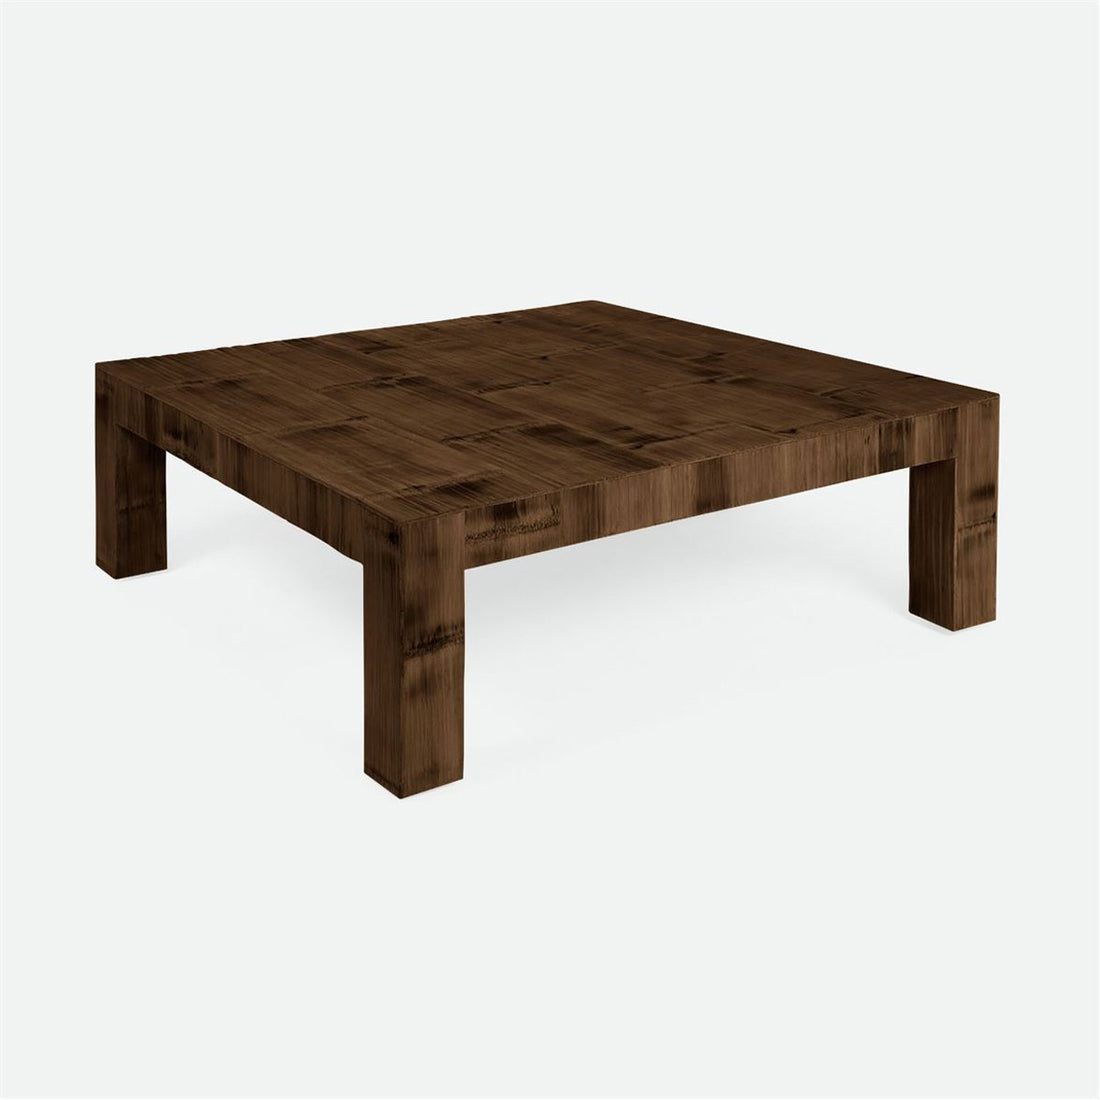 Made Goods Millie Plank Bamboo Coffee Table